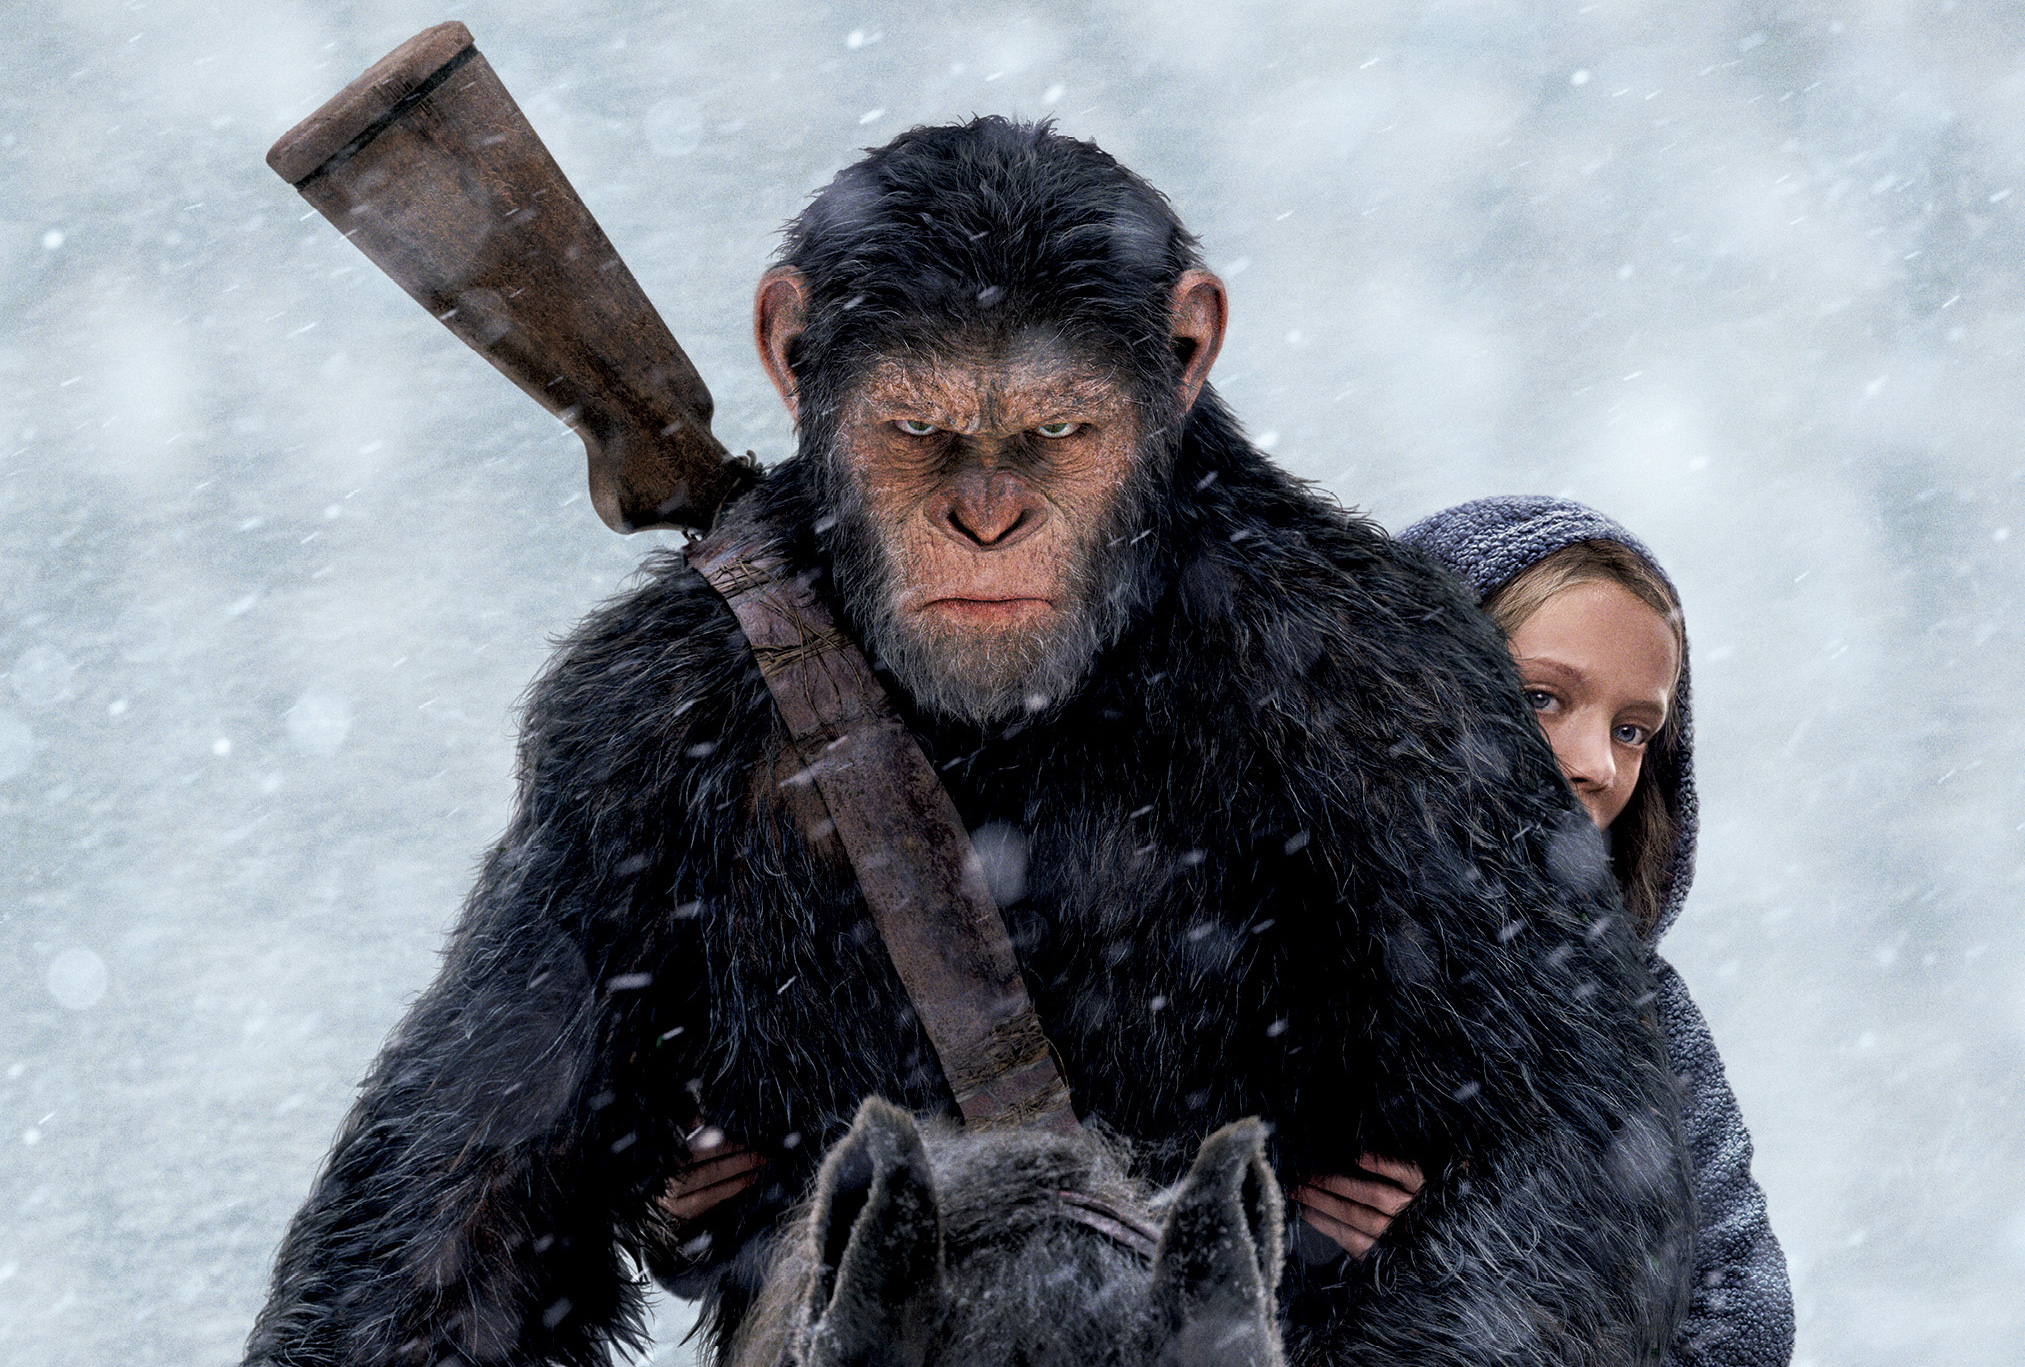 War Of The Planet Of The Apes Free Online War For The Planet Of The Apes 2017, HD Movies, 4k Wallpapers, Images